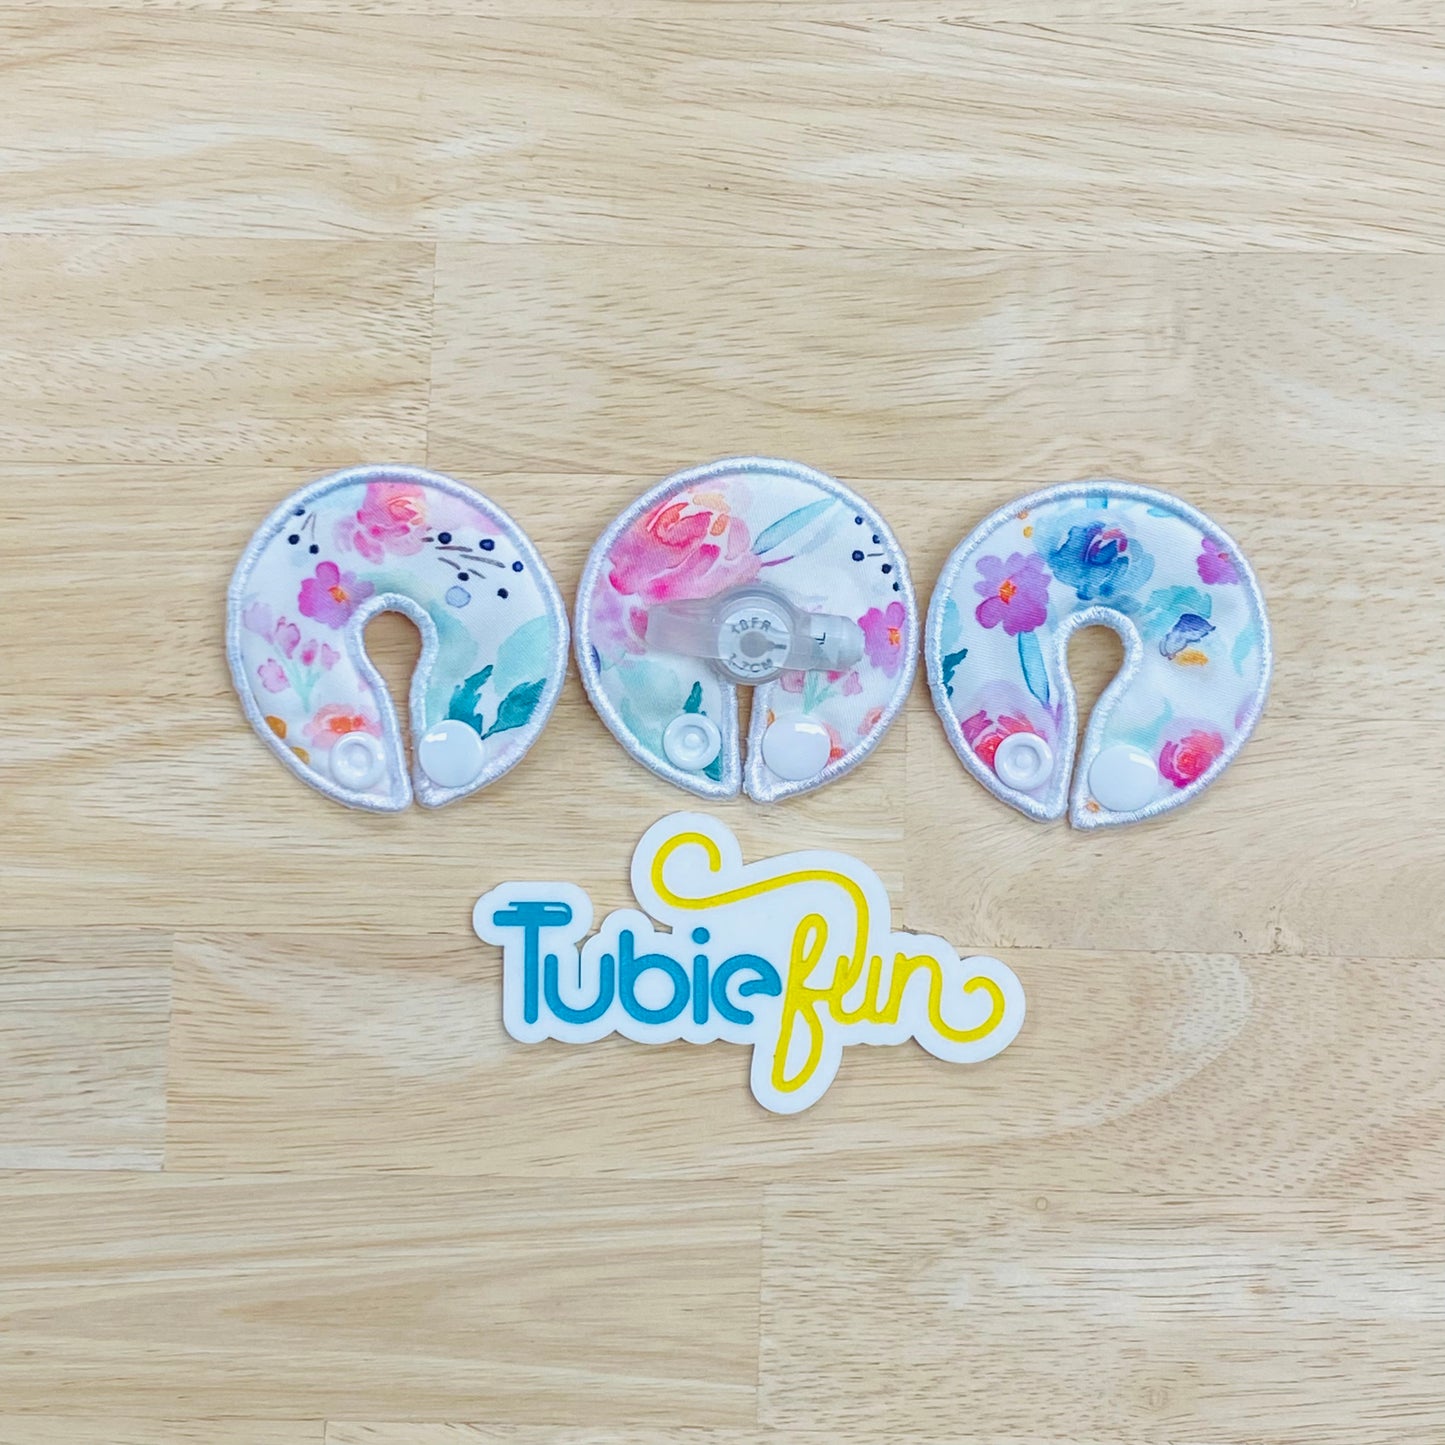 G-Tube Button Pad Cover - Flowers on White